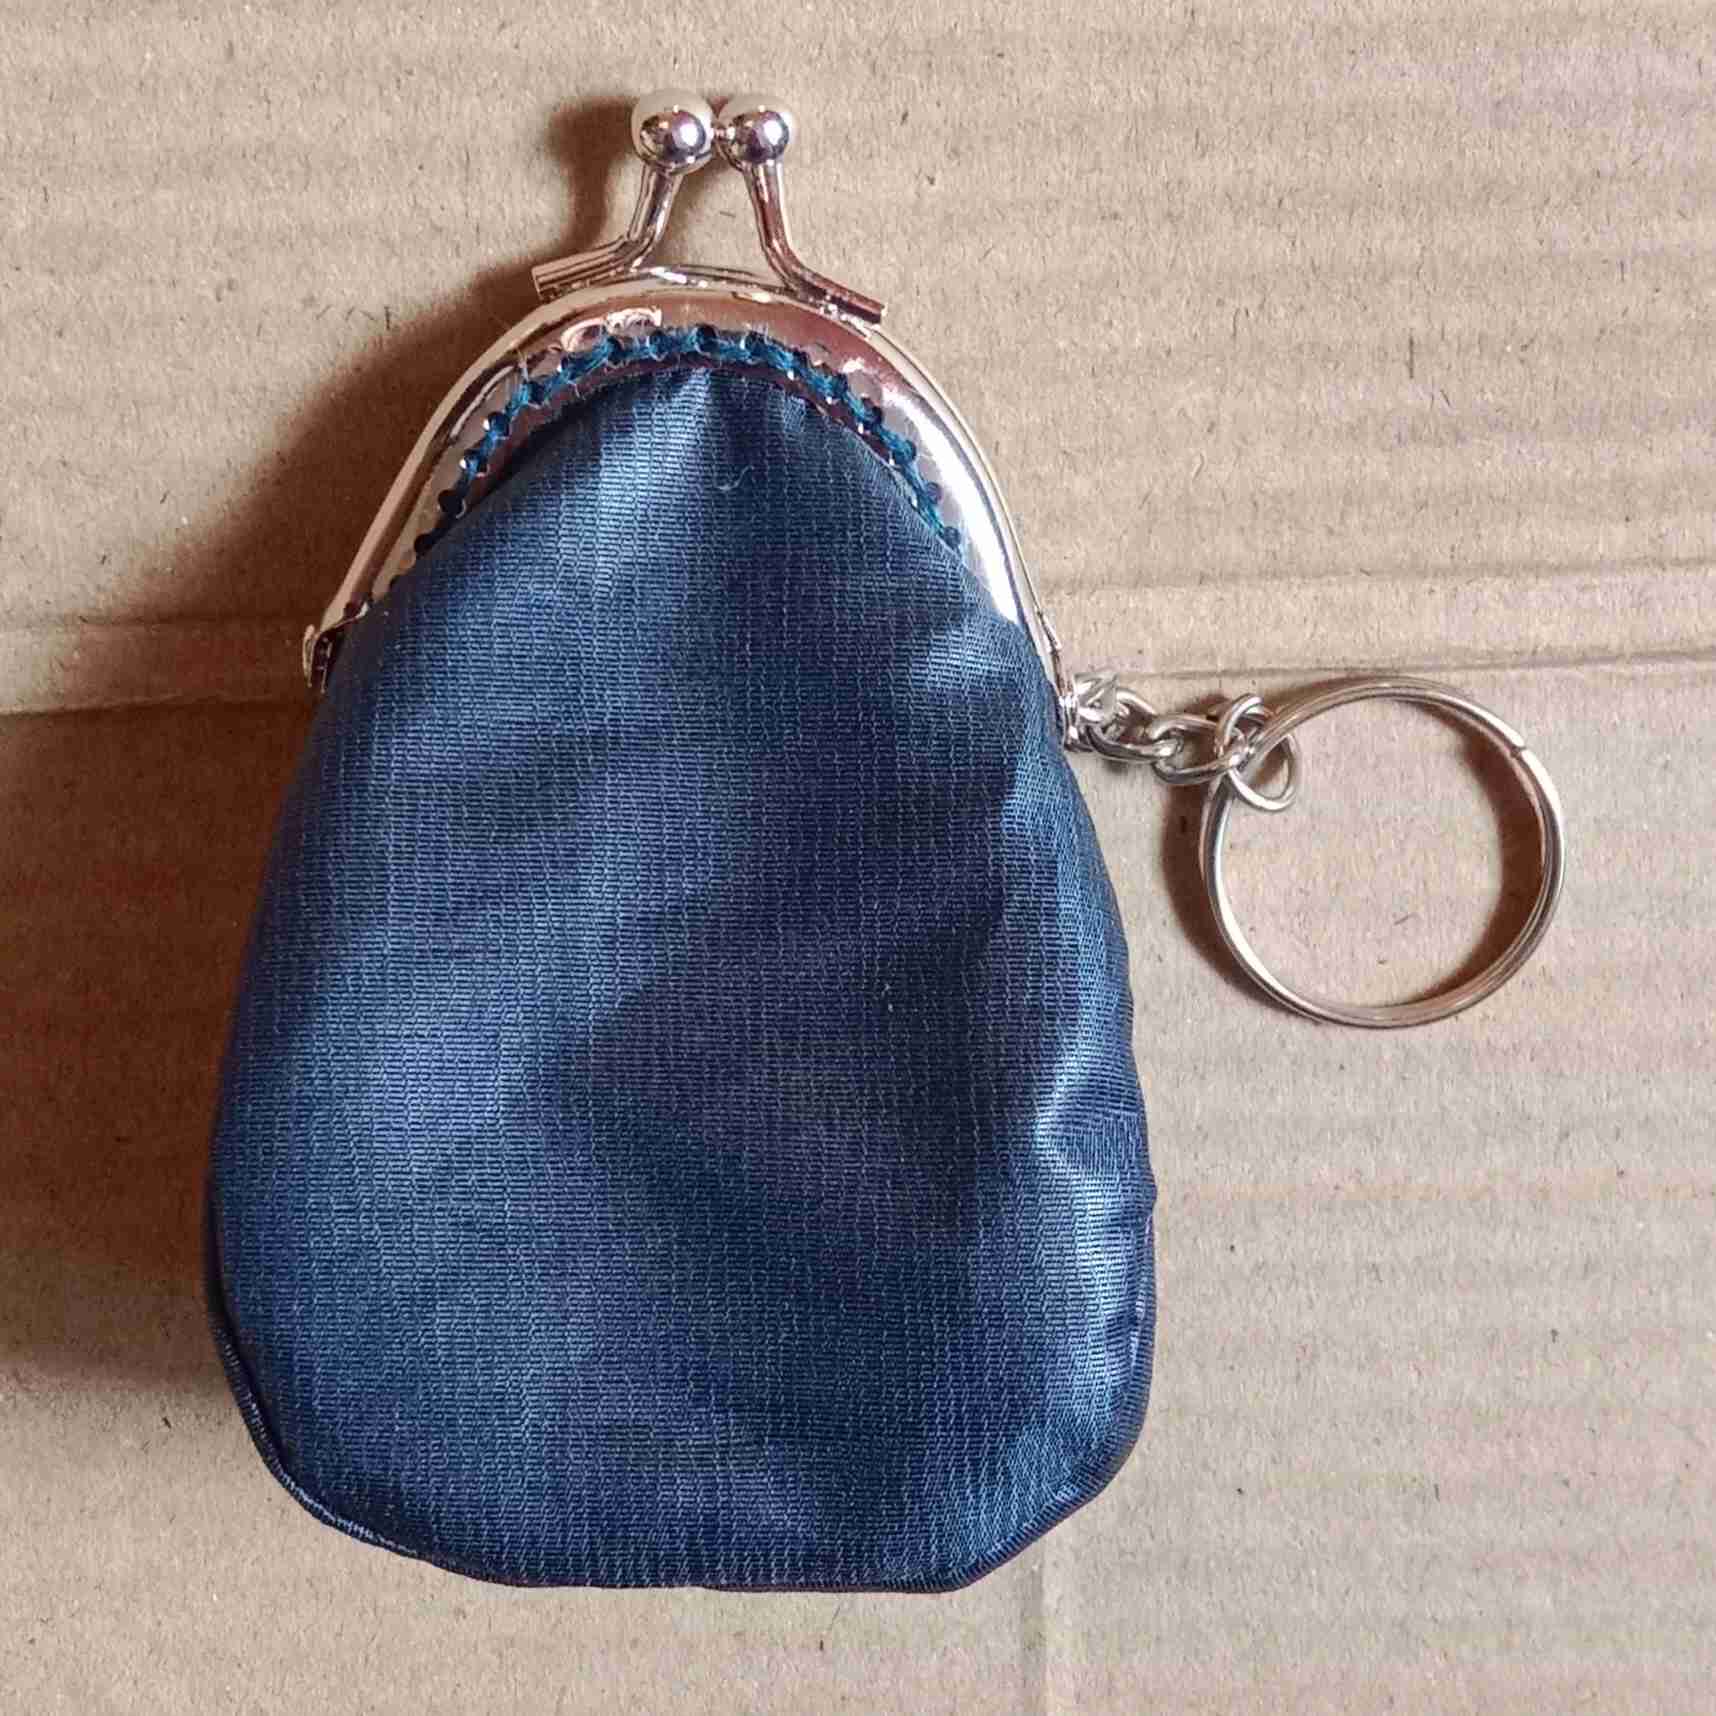 Fabric Mini Coin Clutch with Keychain